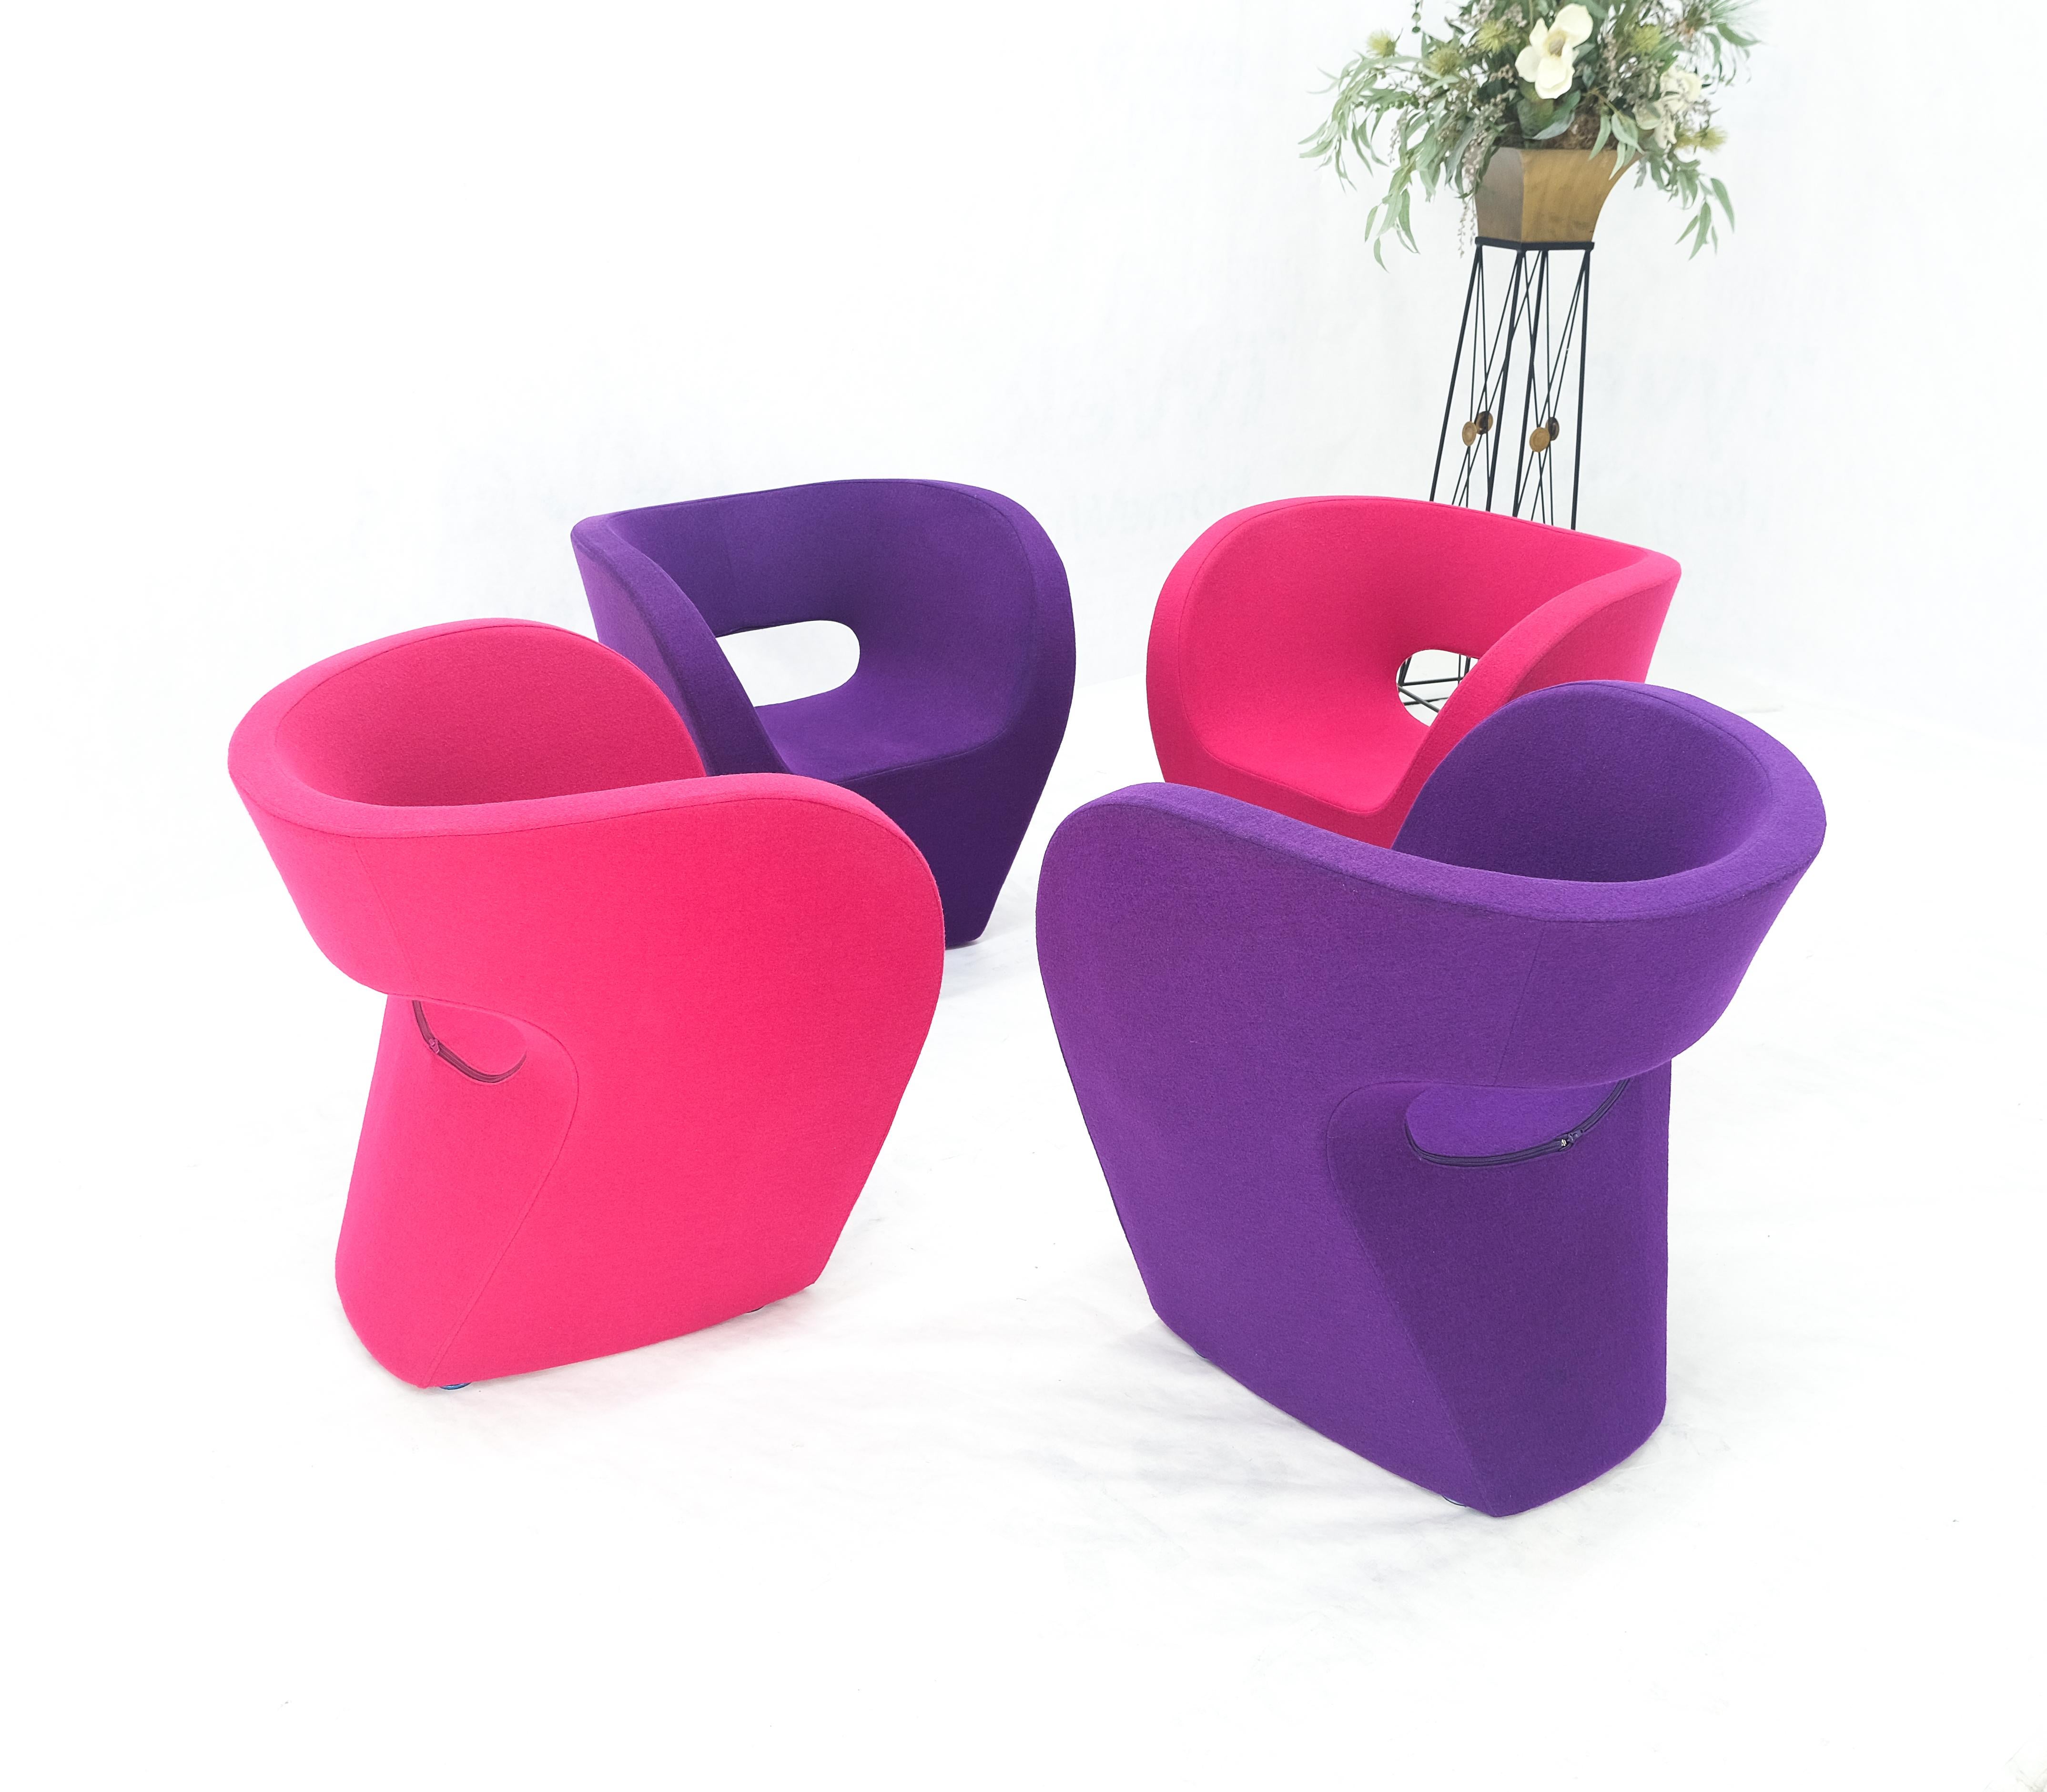 Set 4 Albert Armchair by Ron Arad for Moroso Purple & Red Wool Upholstery MINT! For Sale 2